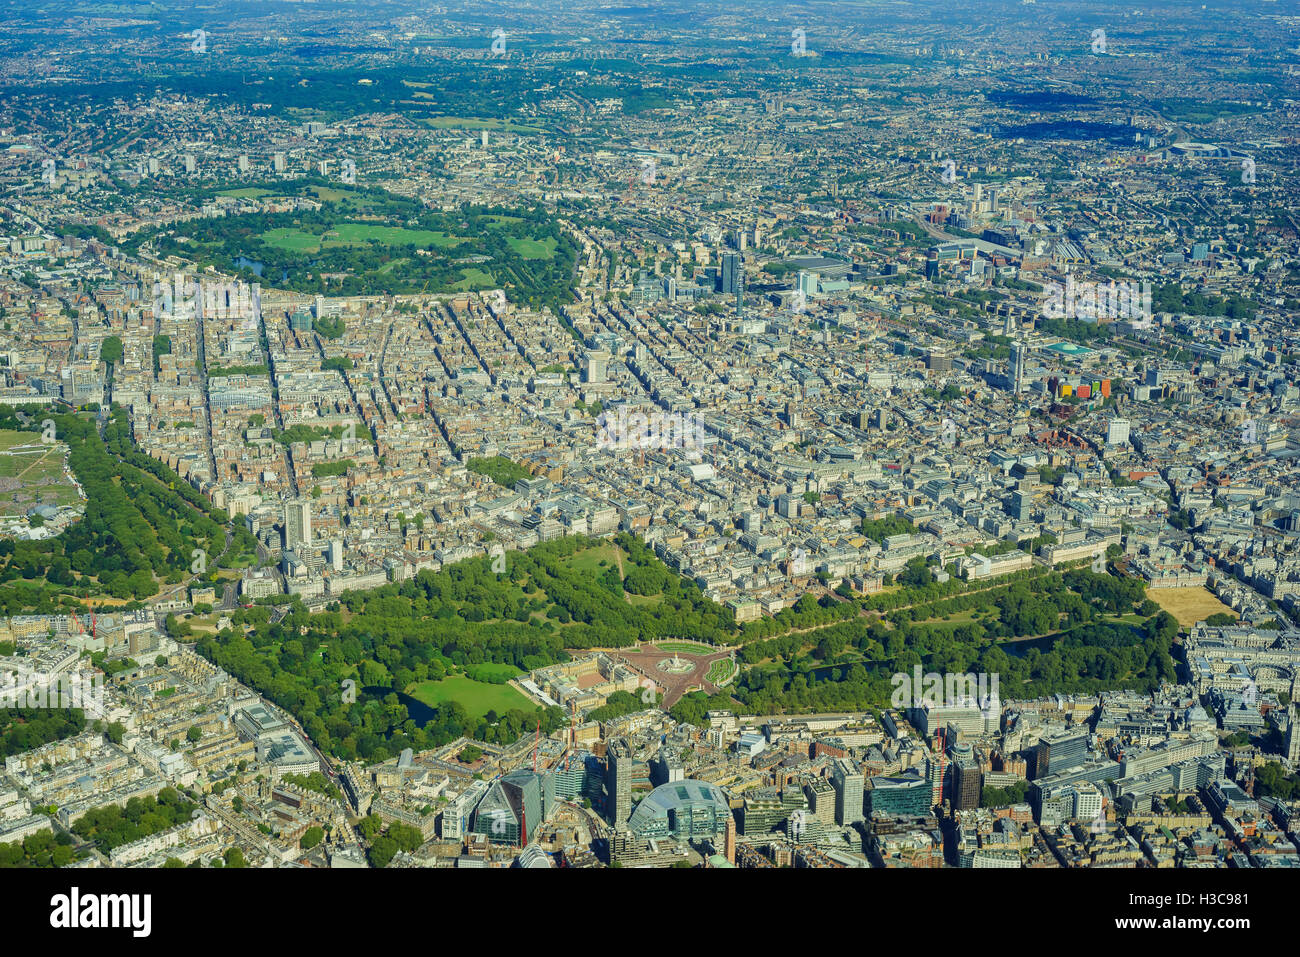 Aerial View of BuckingHam Palace, St. James's Park, Mayfair, Westminster, Covent Garden, Soho, Fitzrovia, Holborn of London, Uni Stock Photo